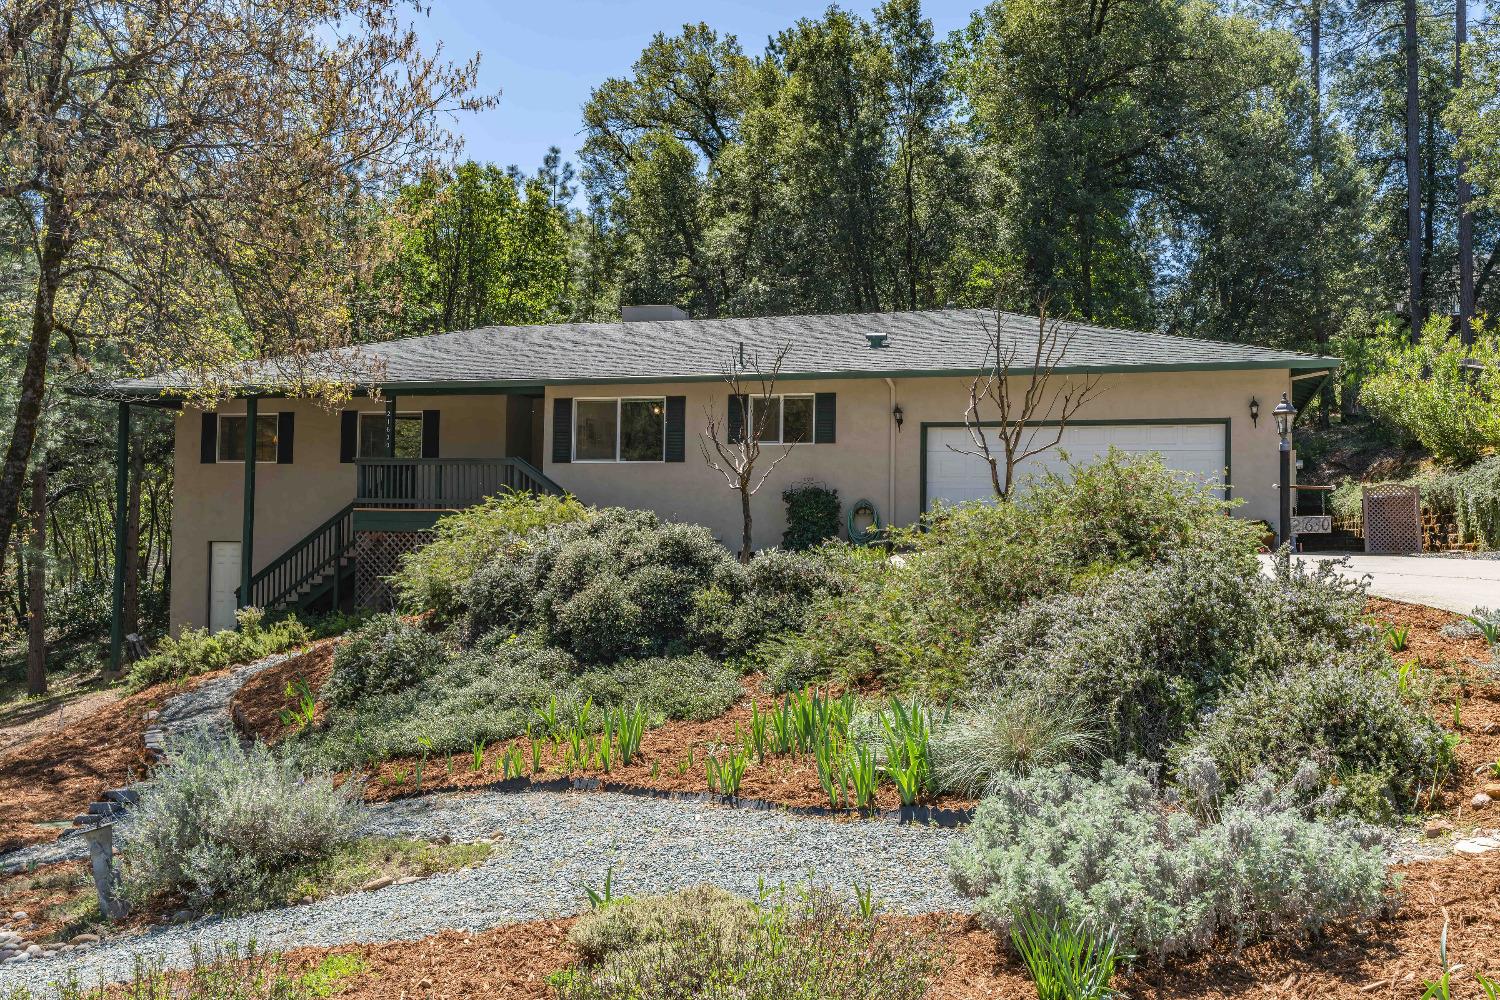 Photo of 21630 Gayla Dr in Pine Grove, CA